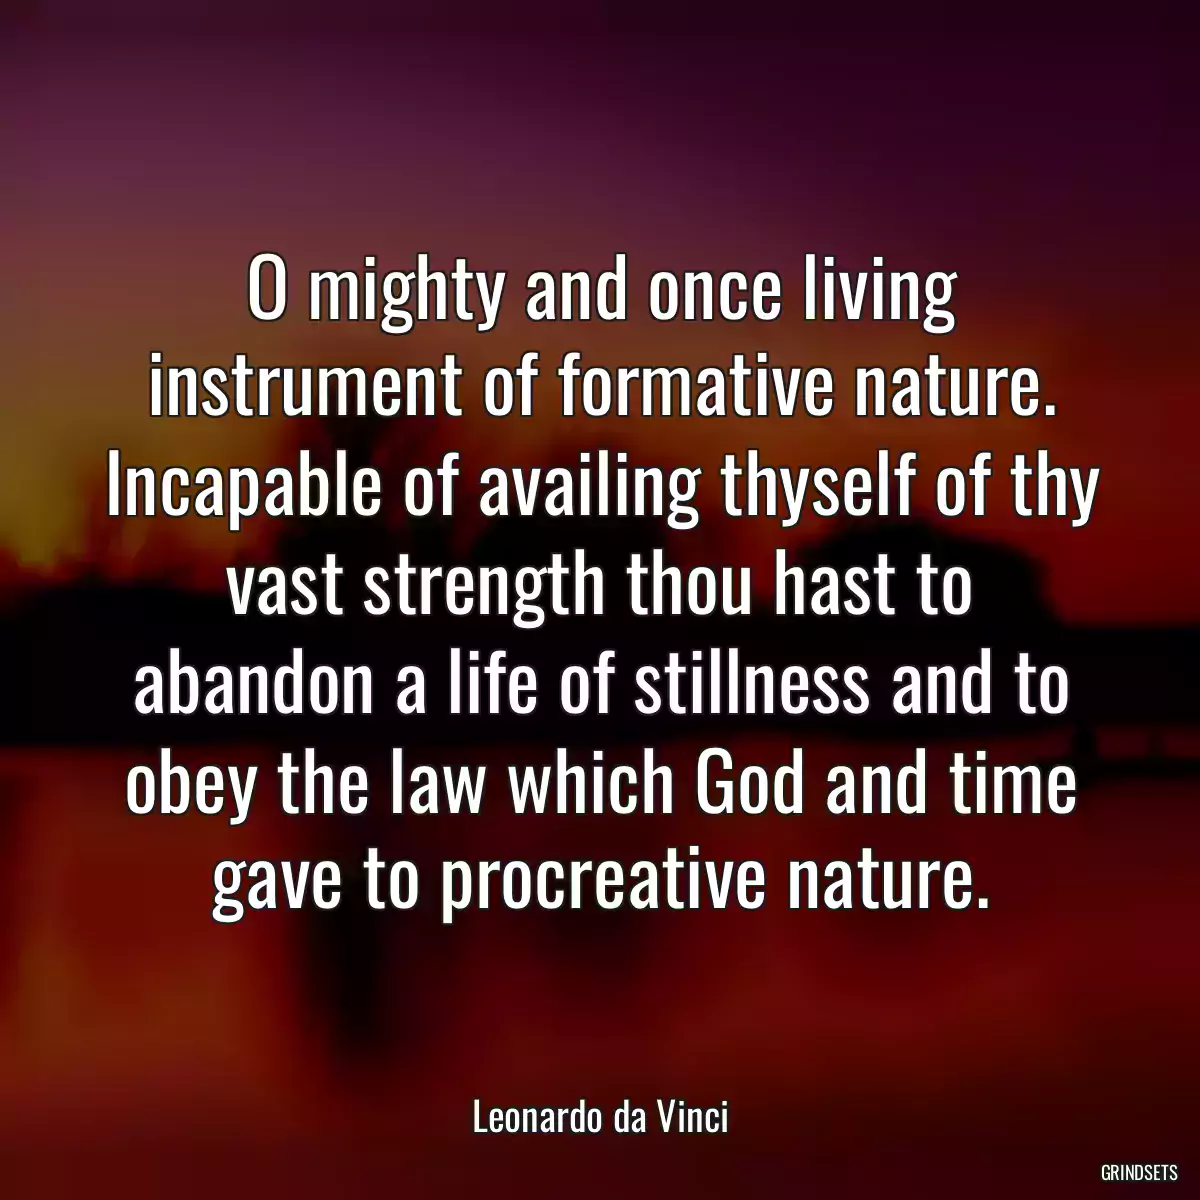 O mighty and once living instrument of formative nature. Incapable of availing thyself of thy vast strength thou hast to abandon a life of stillness and to obey the law which God and time gave to procreative nature.